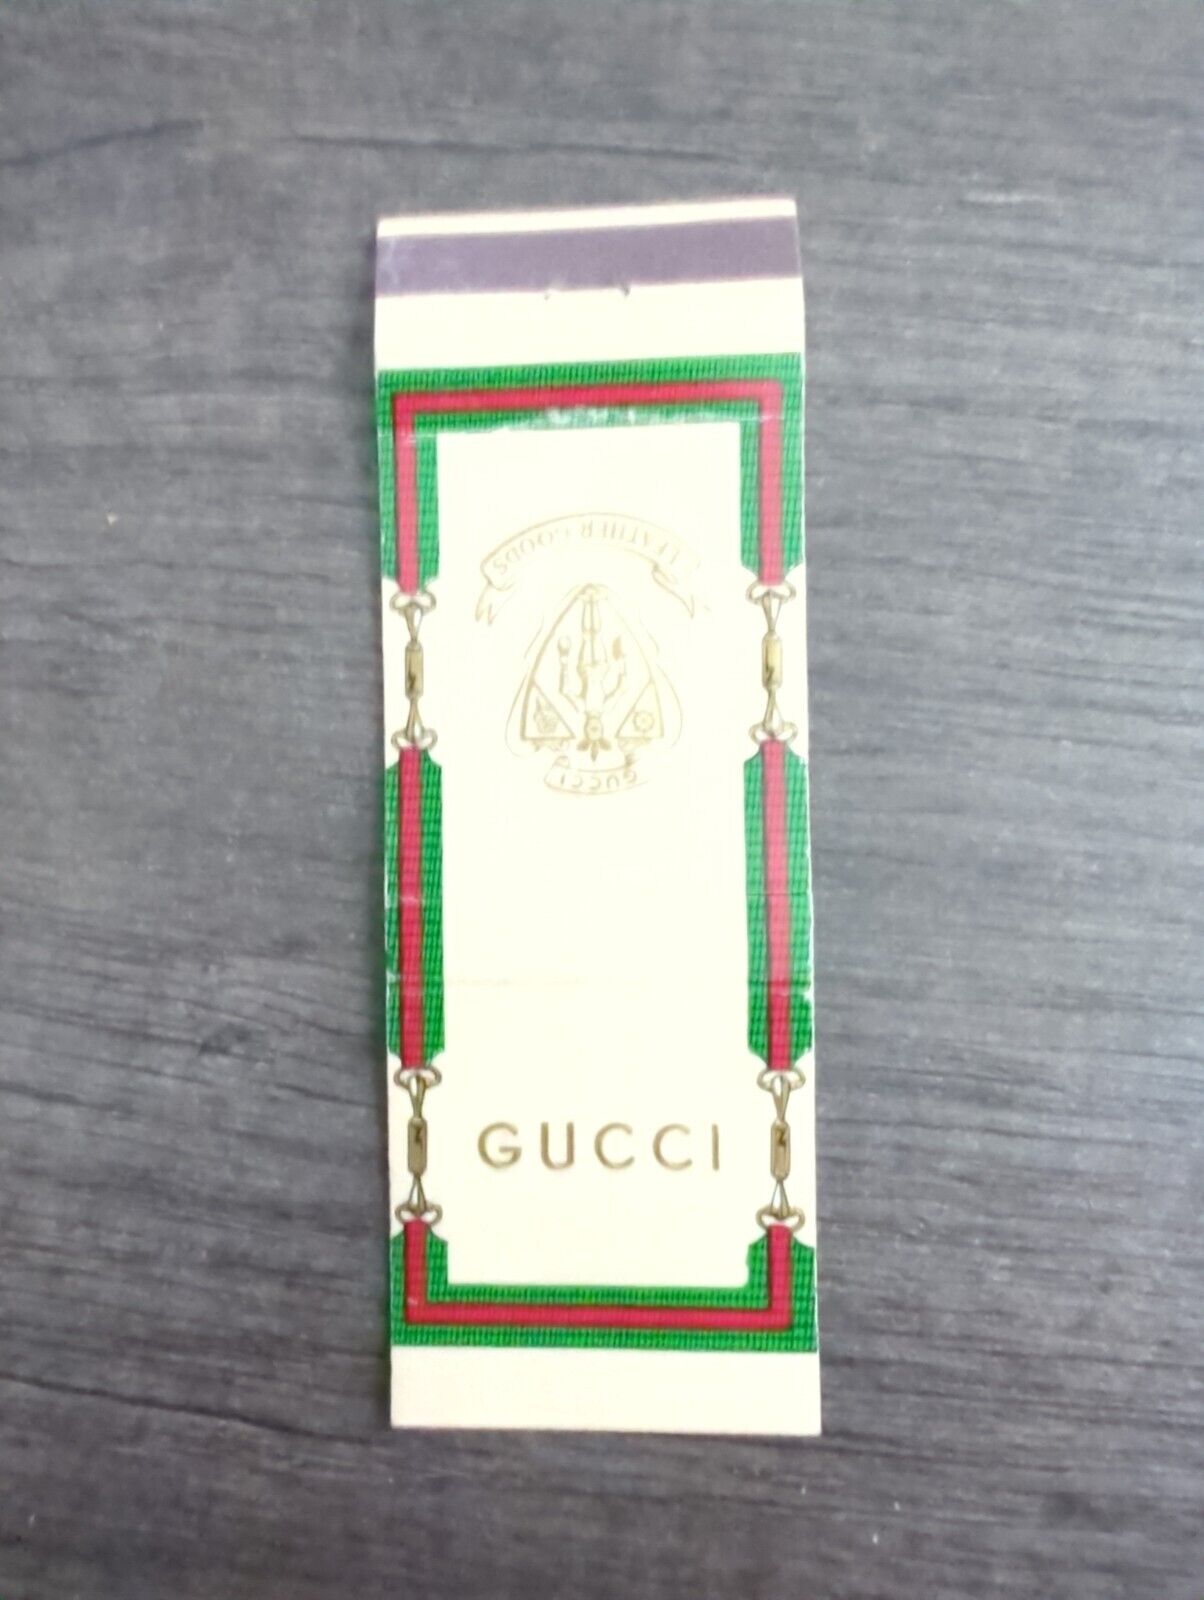 GUCCI Leather Goods - Lion Match Corp New York Matchbook Cover